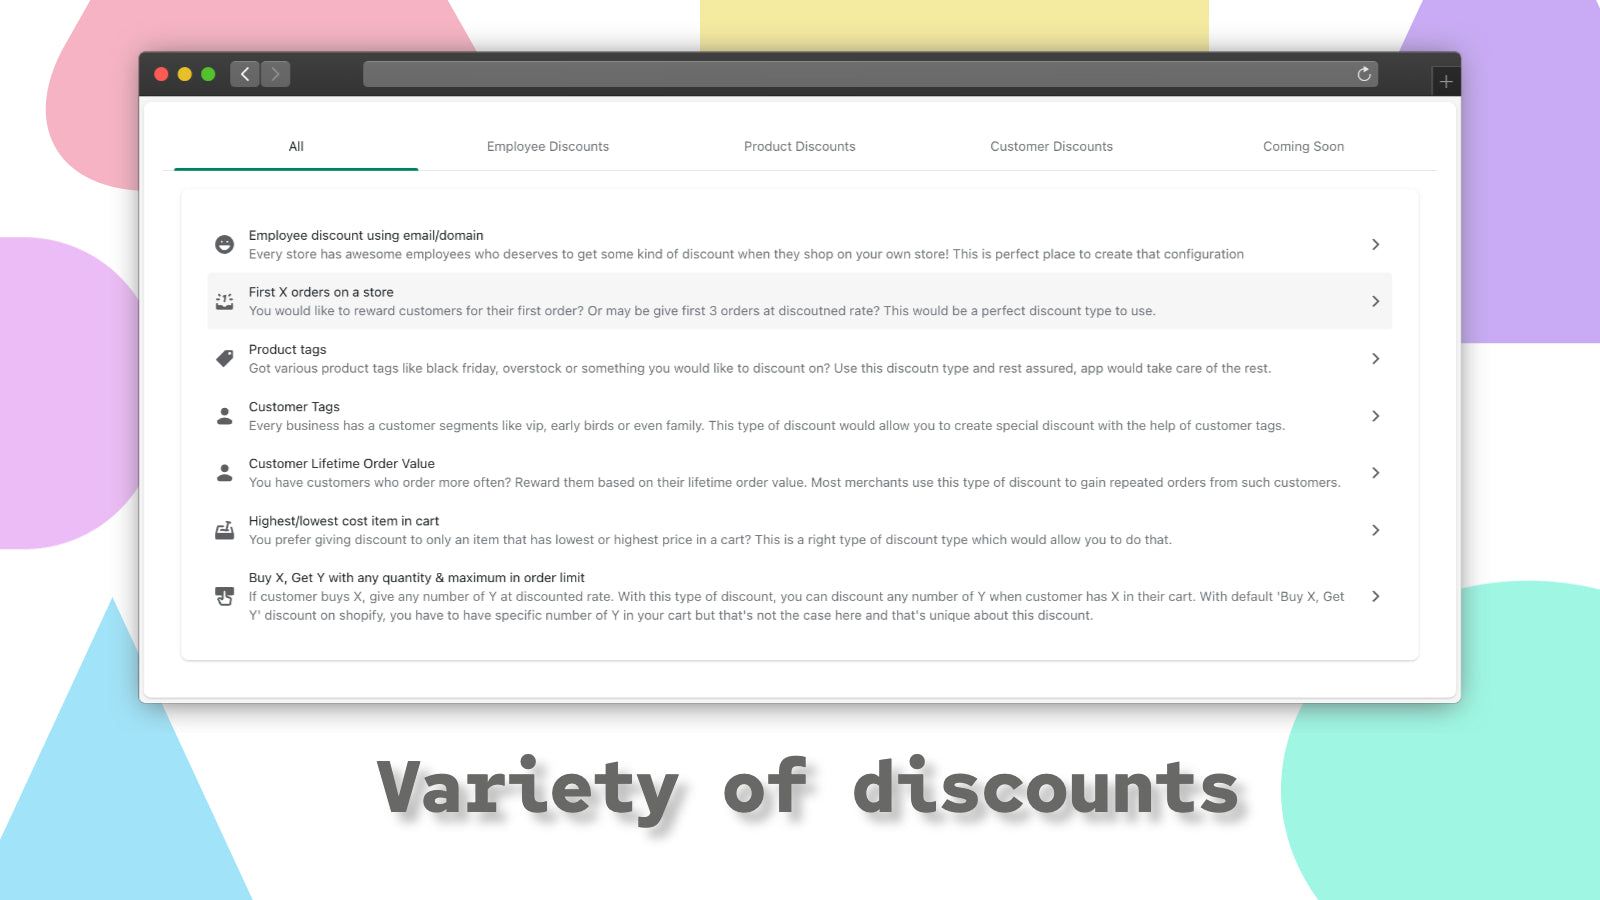 Variety of discount types.